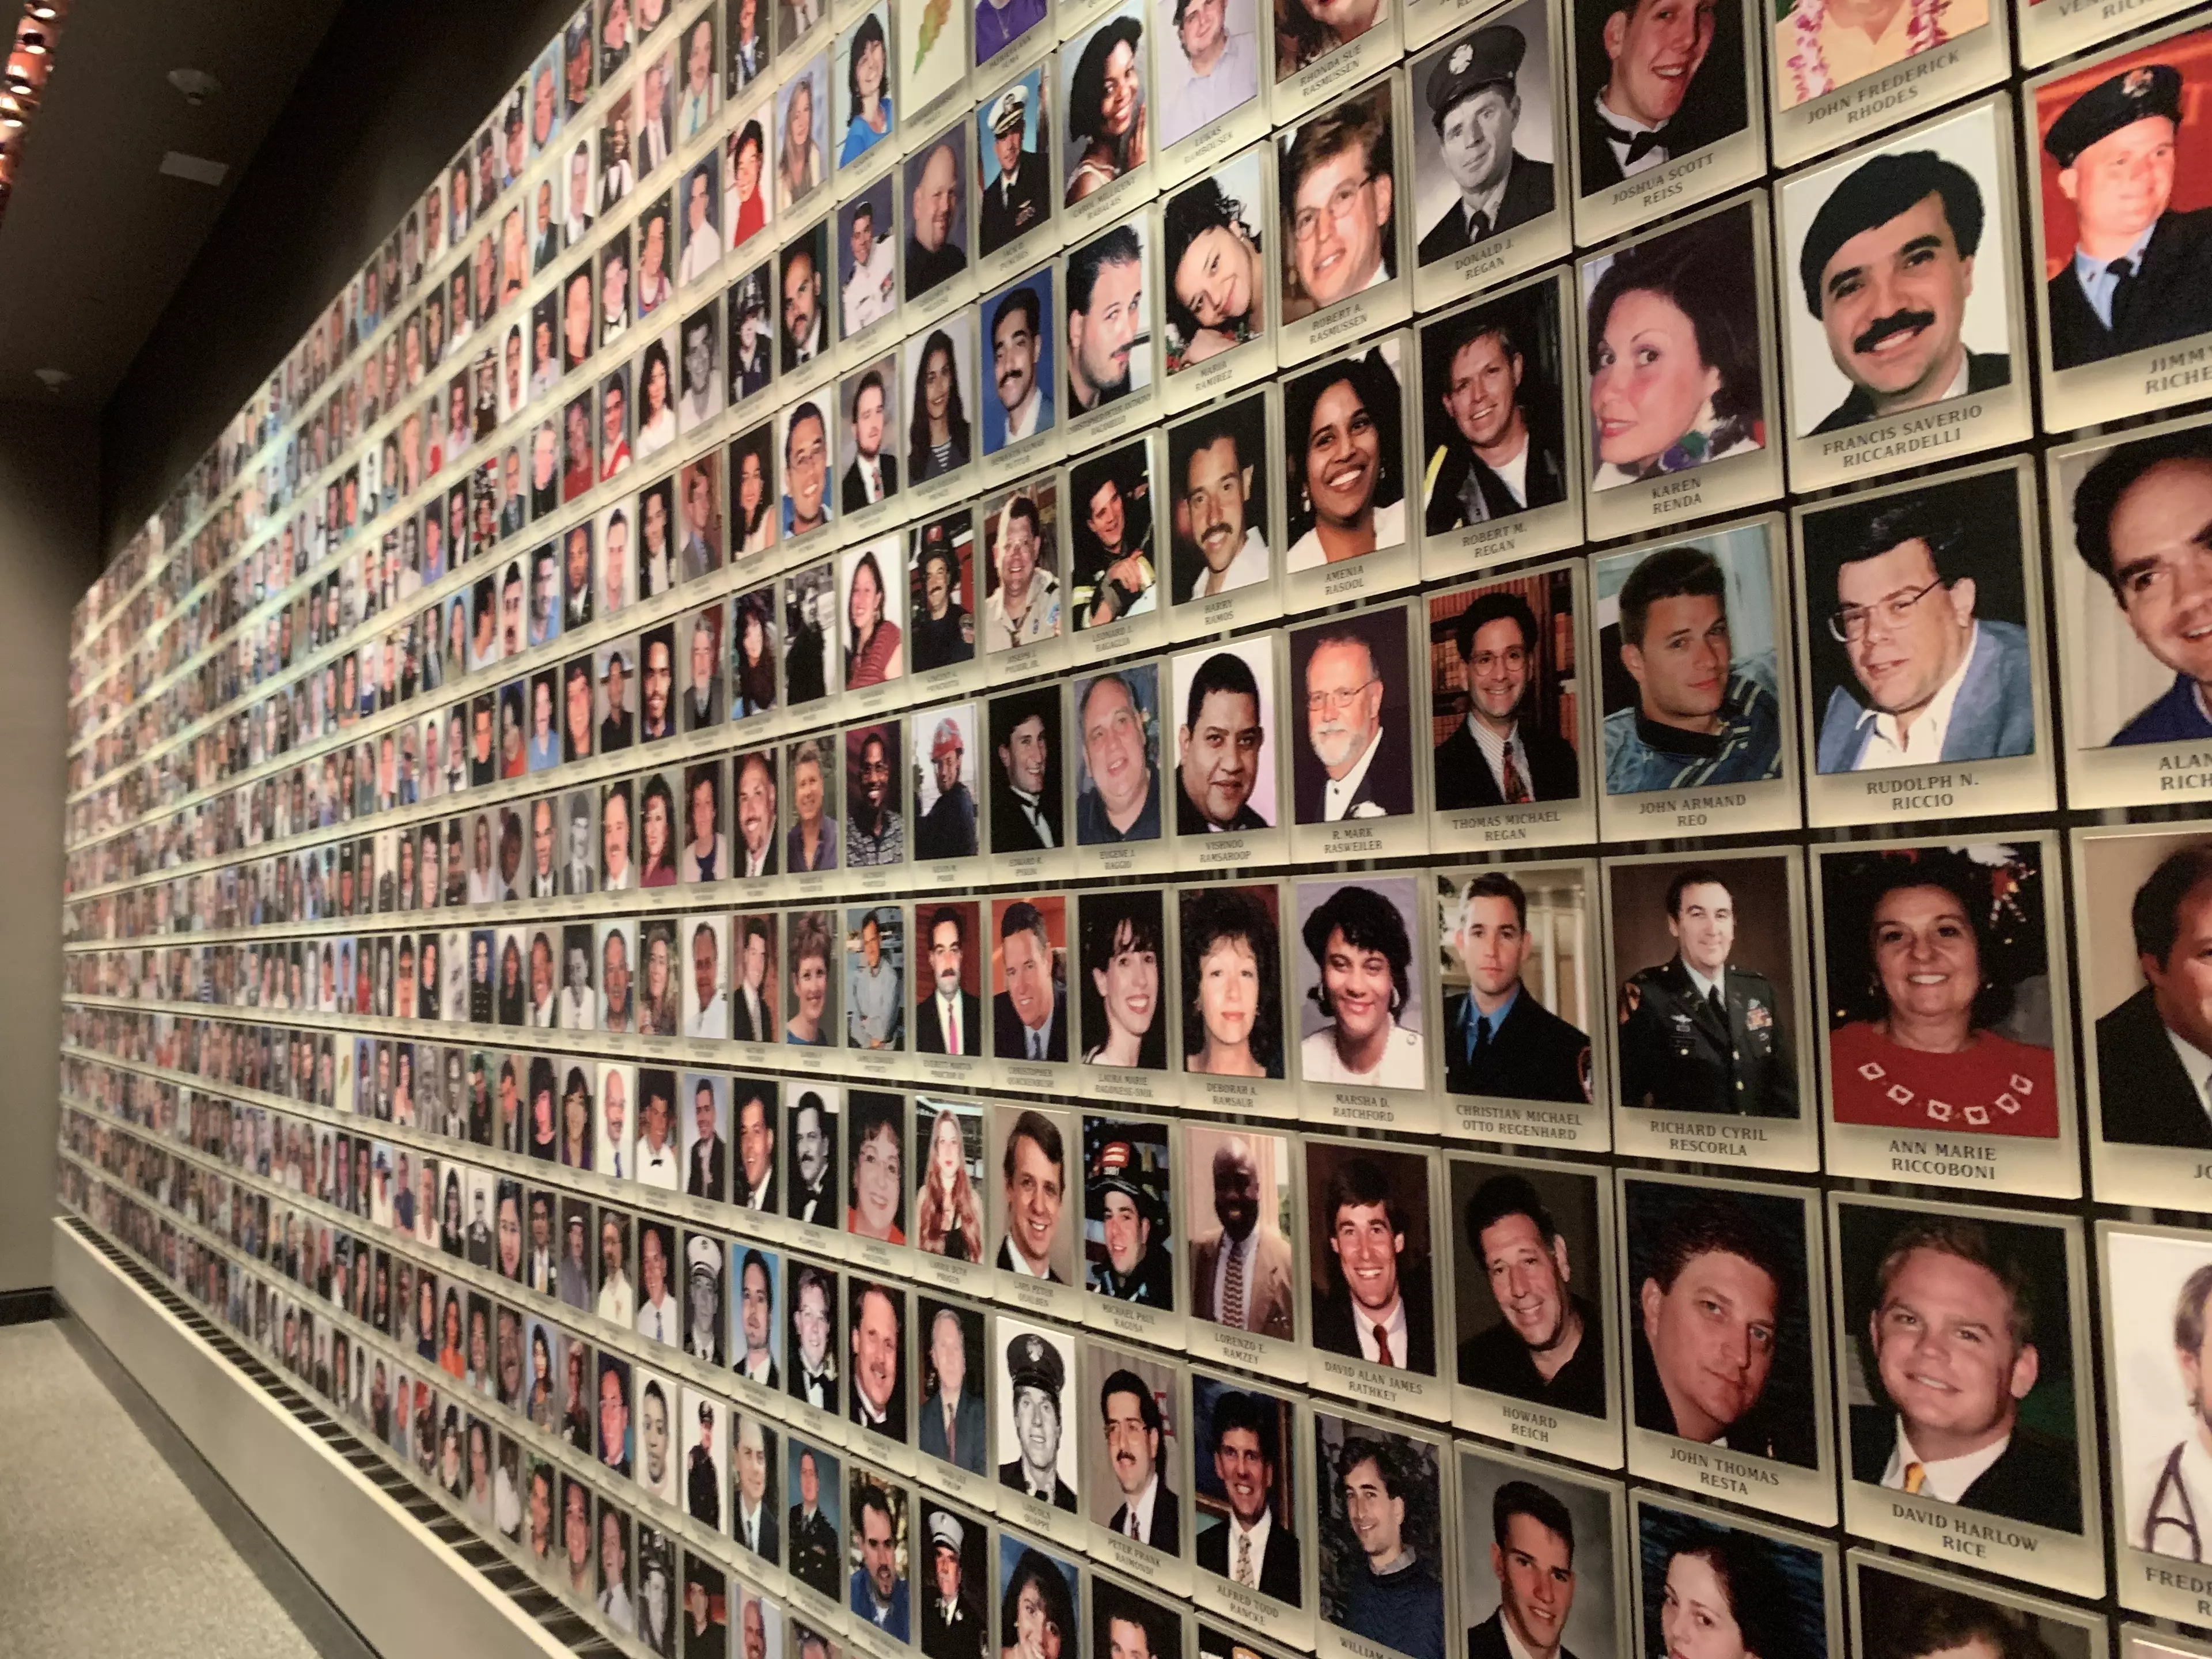 Photos of the victims of the 9/11 attacks are on display in the Ground Zero Memorial Museum in New York. (